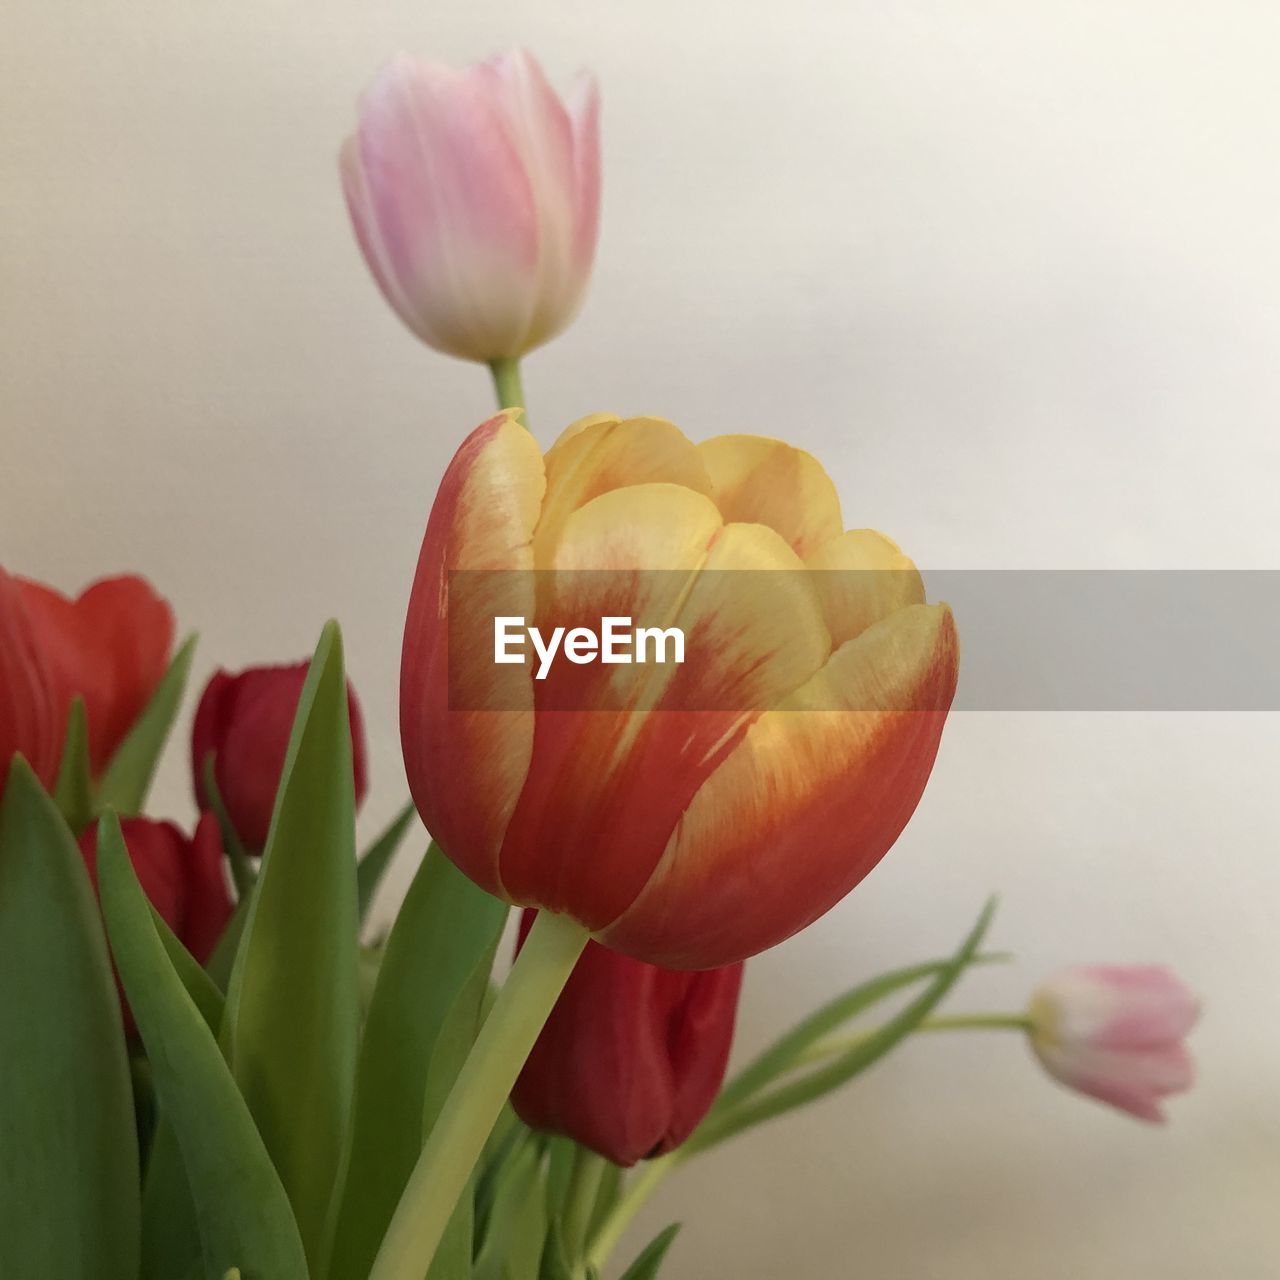 flower, plant, flowering plant, freshness, beauty in nature, petal, fragility, close-up, tulip, flower head, nature, inflorescence, growth, no people, pink, plant part, leaf, yellow, plant stem, focus on foreground, bud, springtime, red, outdoors, blossom, botany